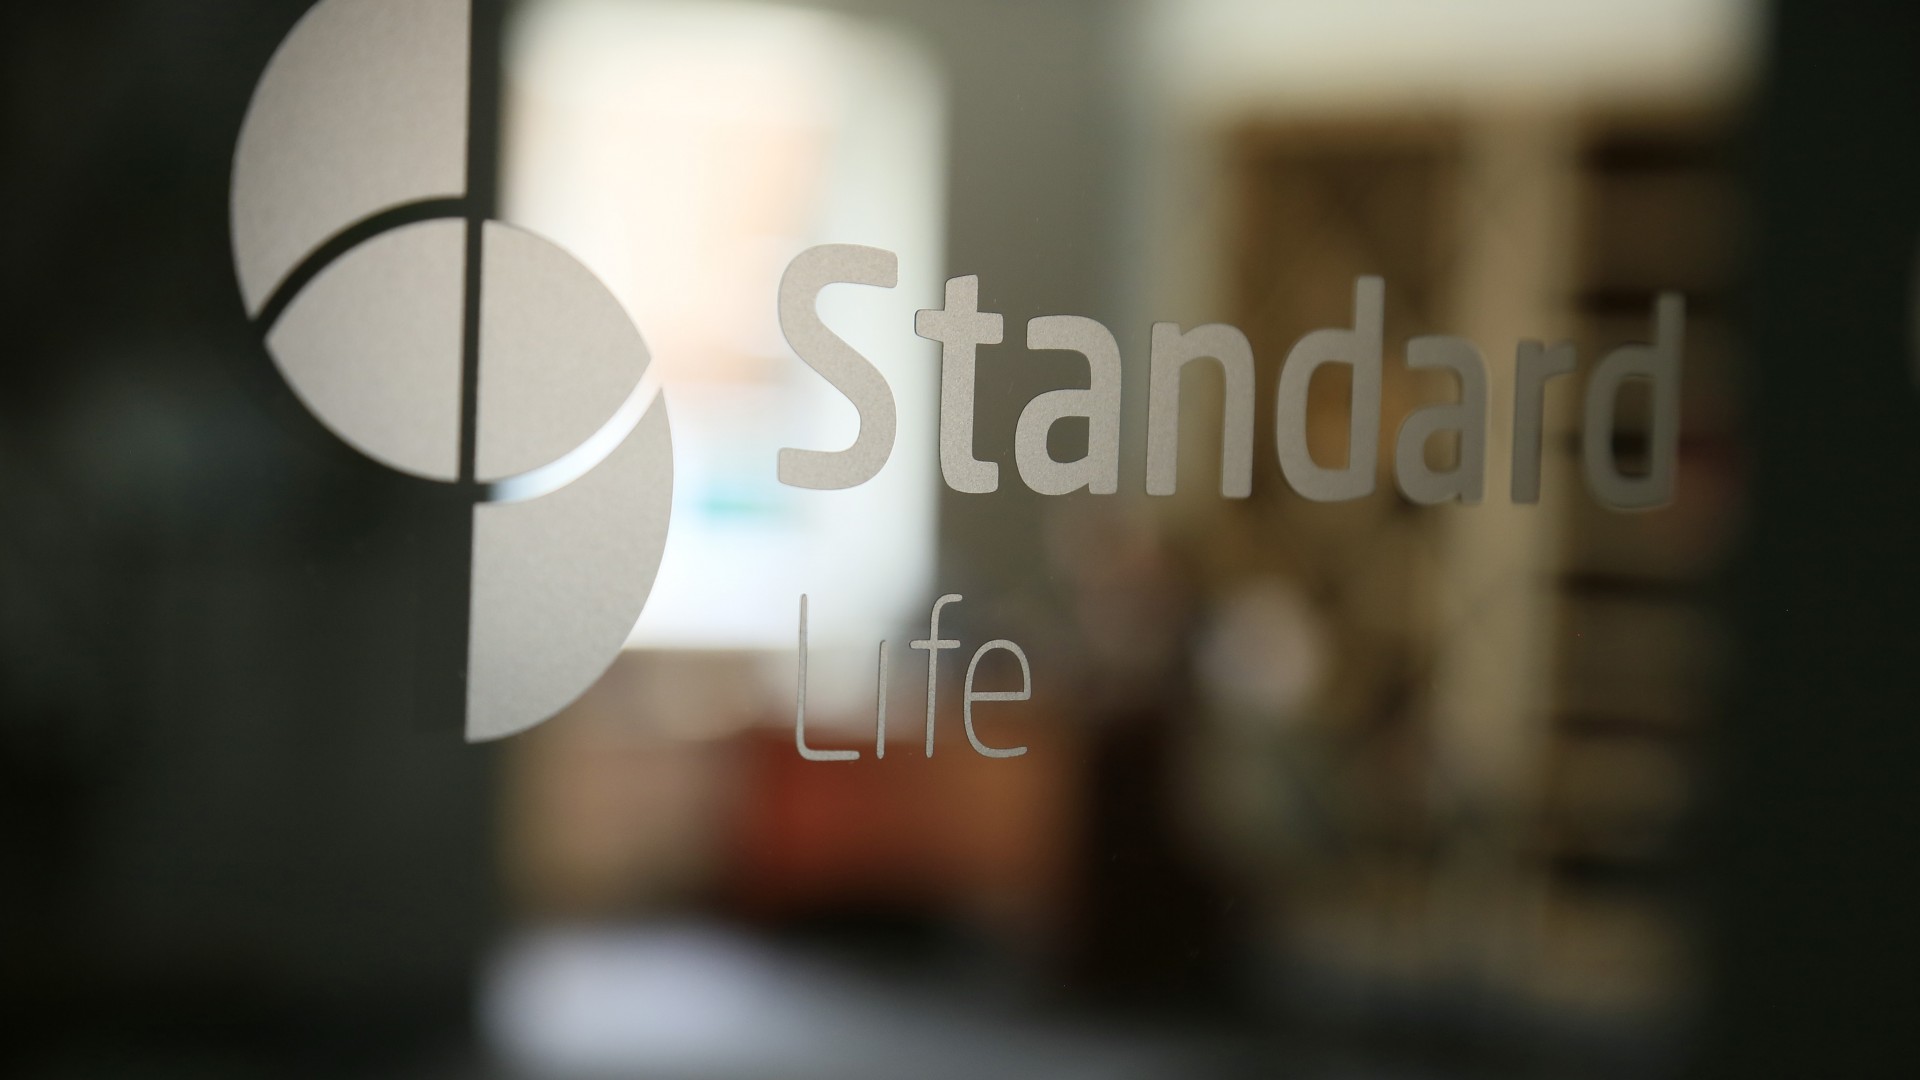 The new Board of Directors of JSC "LIC Standard Life" has been elected